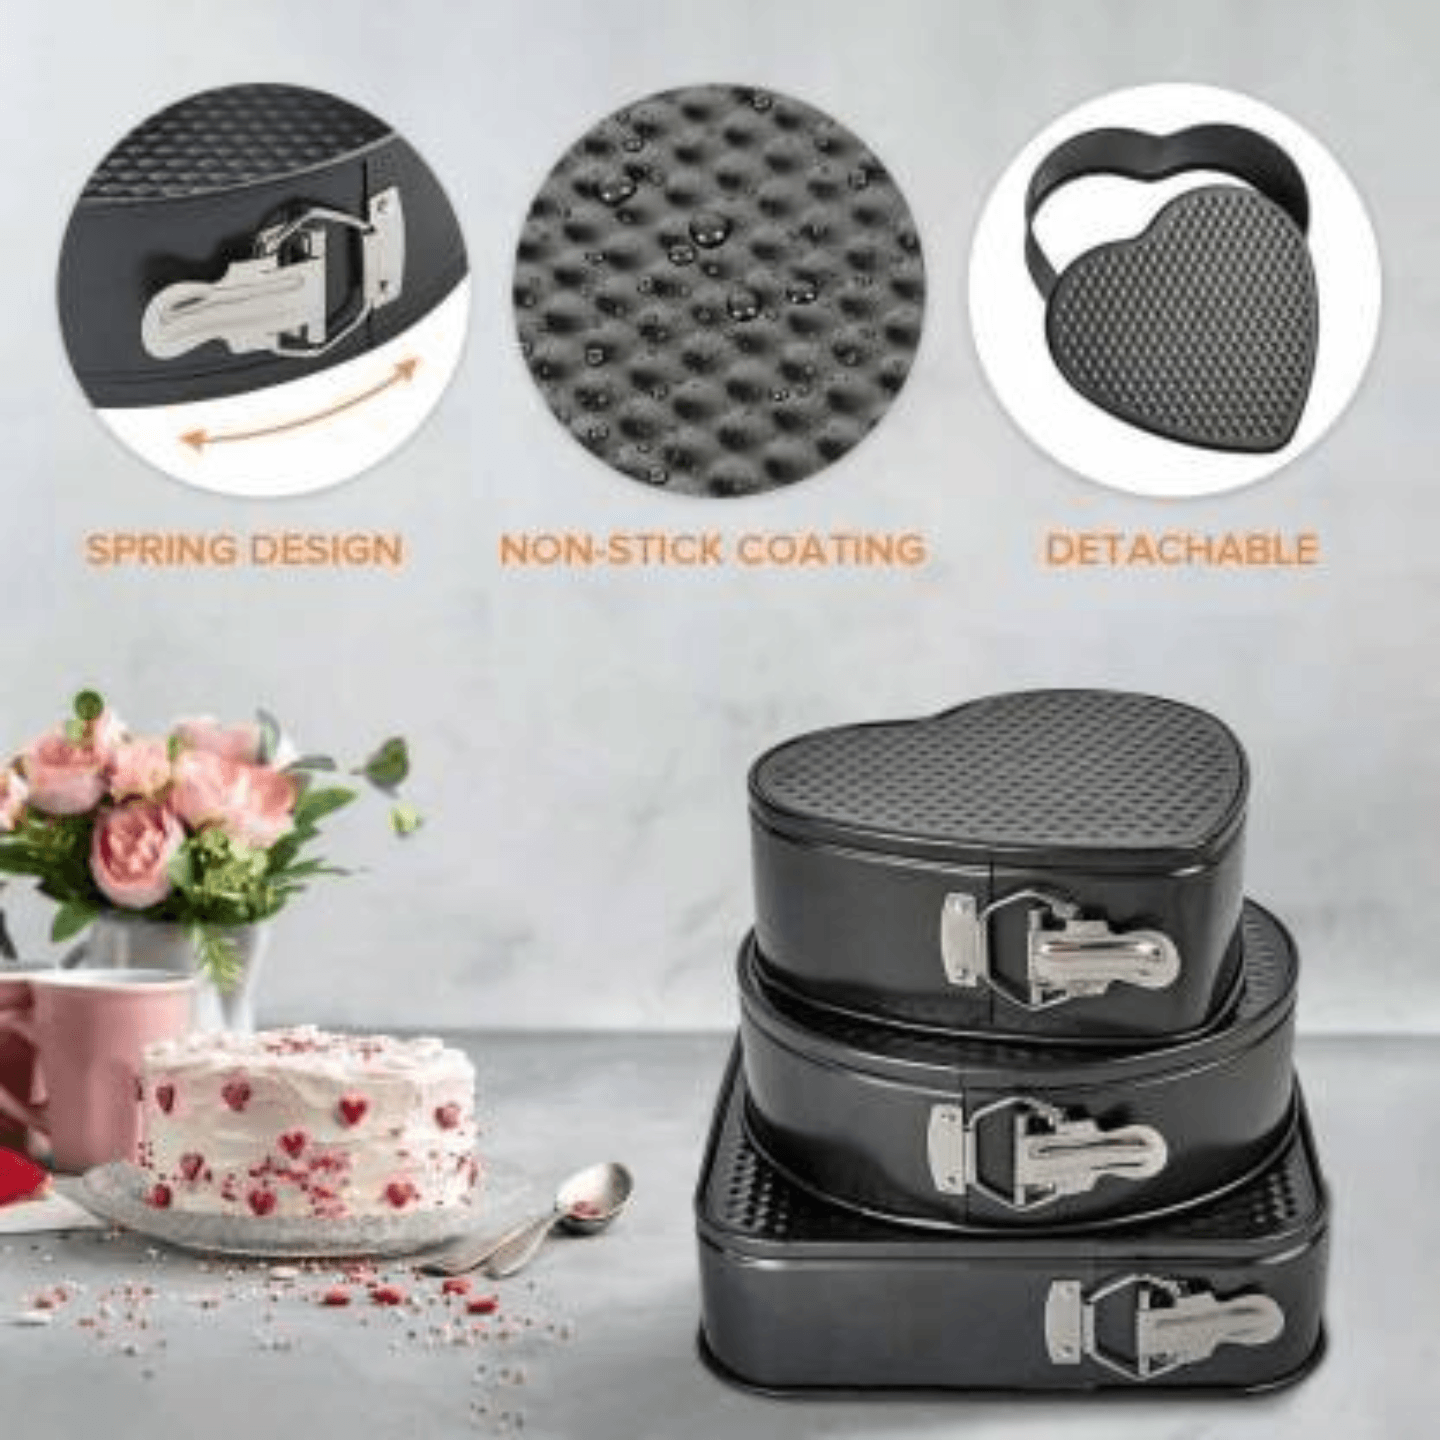 Heart, Round, and Square Shape Cake Moulds for Baking Non-Stick Cake TinsPanTrays for Oven, and Cooker with Removable Base Cake Mould  Pack of 3